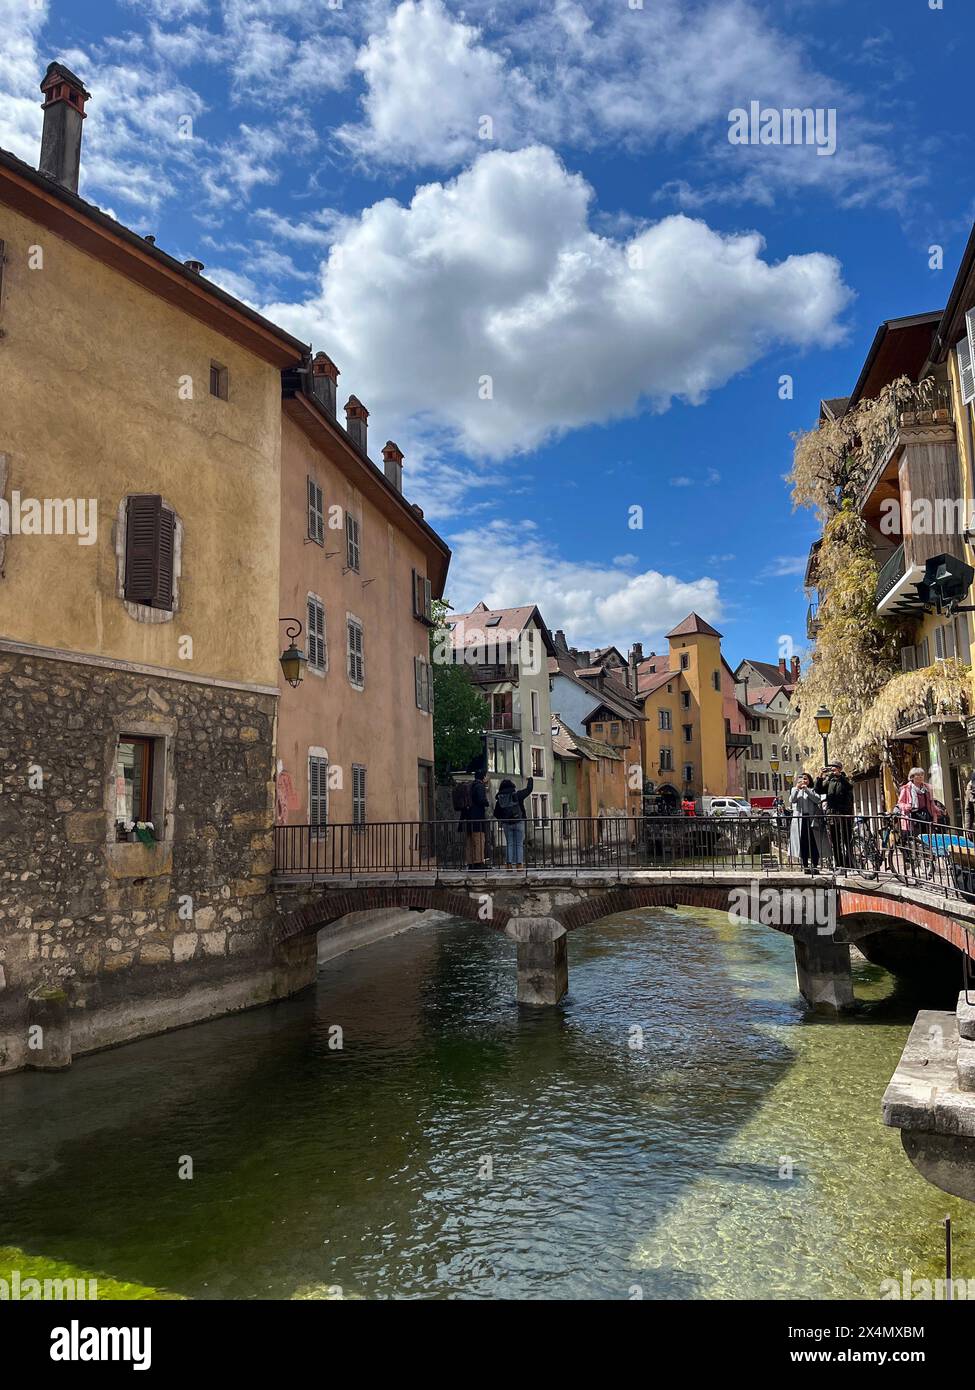 Annecy, Haute-Savoie, France: skyline of the old town and the crystal clear waters of one of the canals of the Thiou River, French Venice Stock Photo